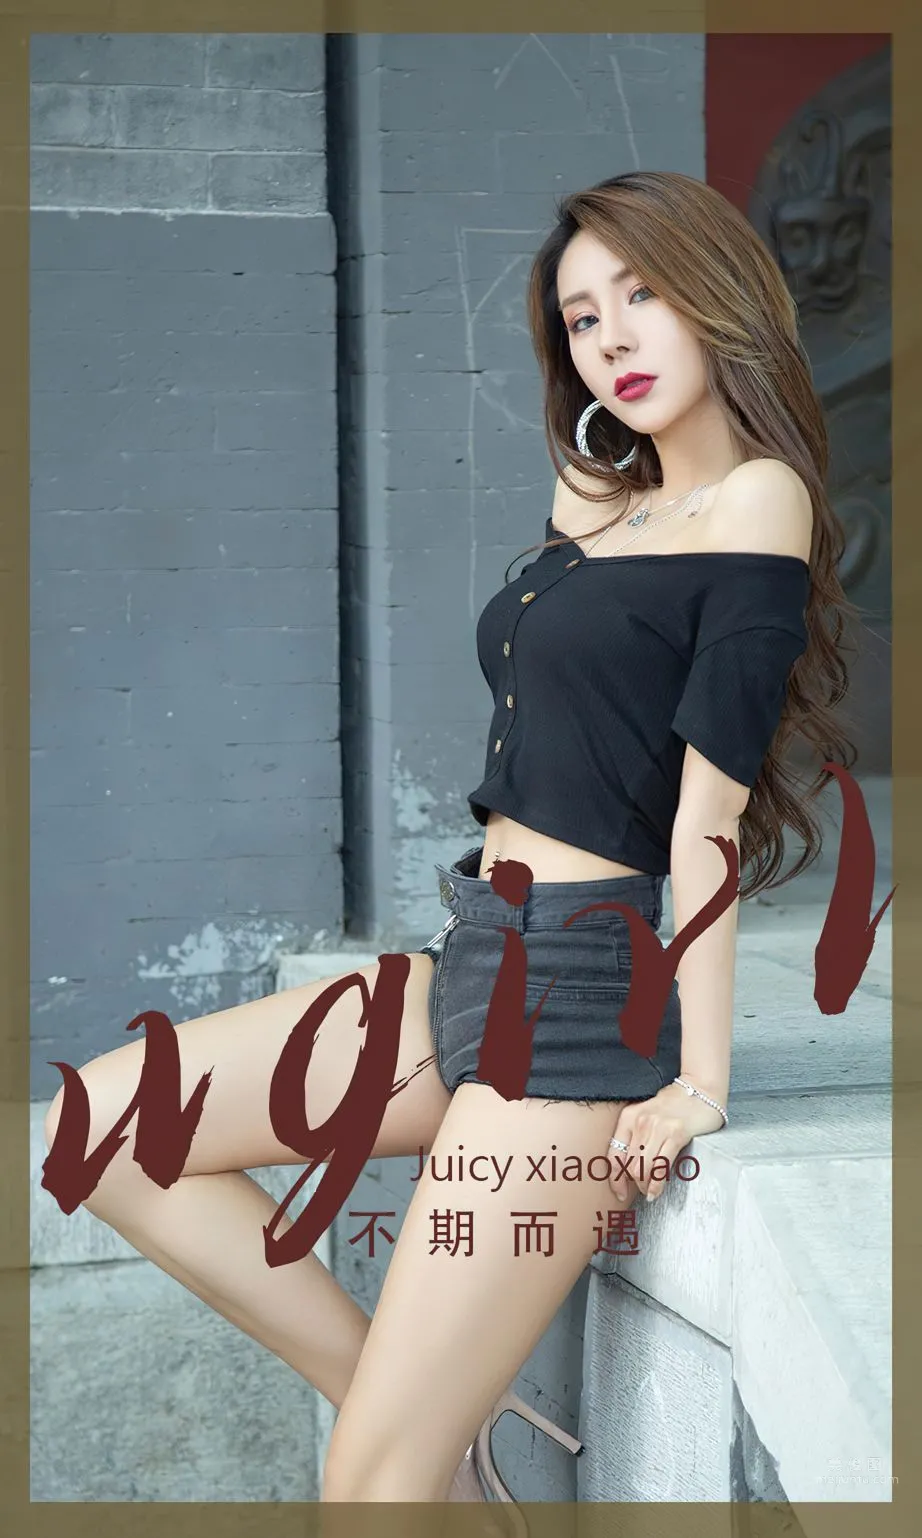 Juicy xiaoxiao 不期而遇_0